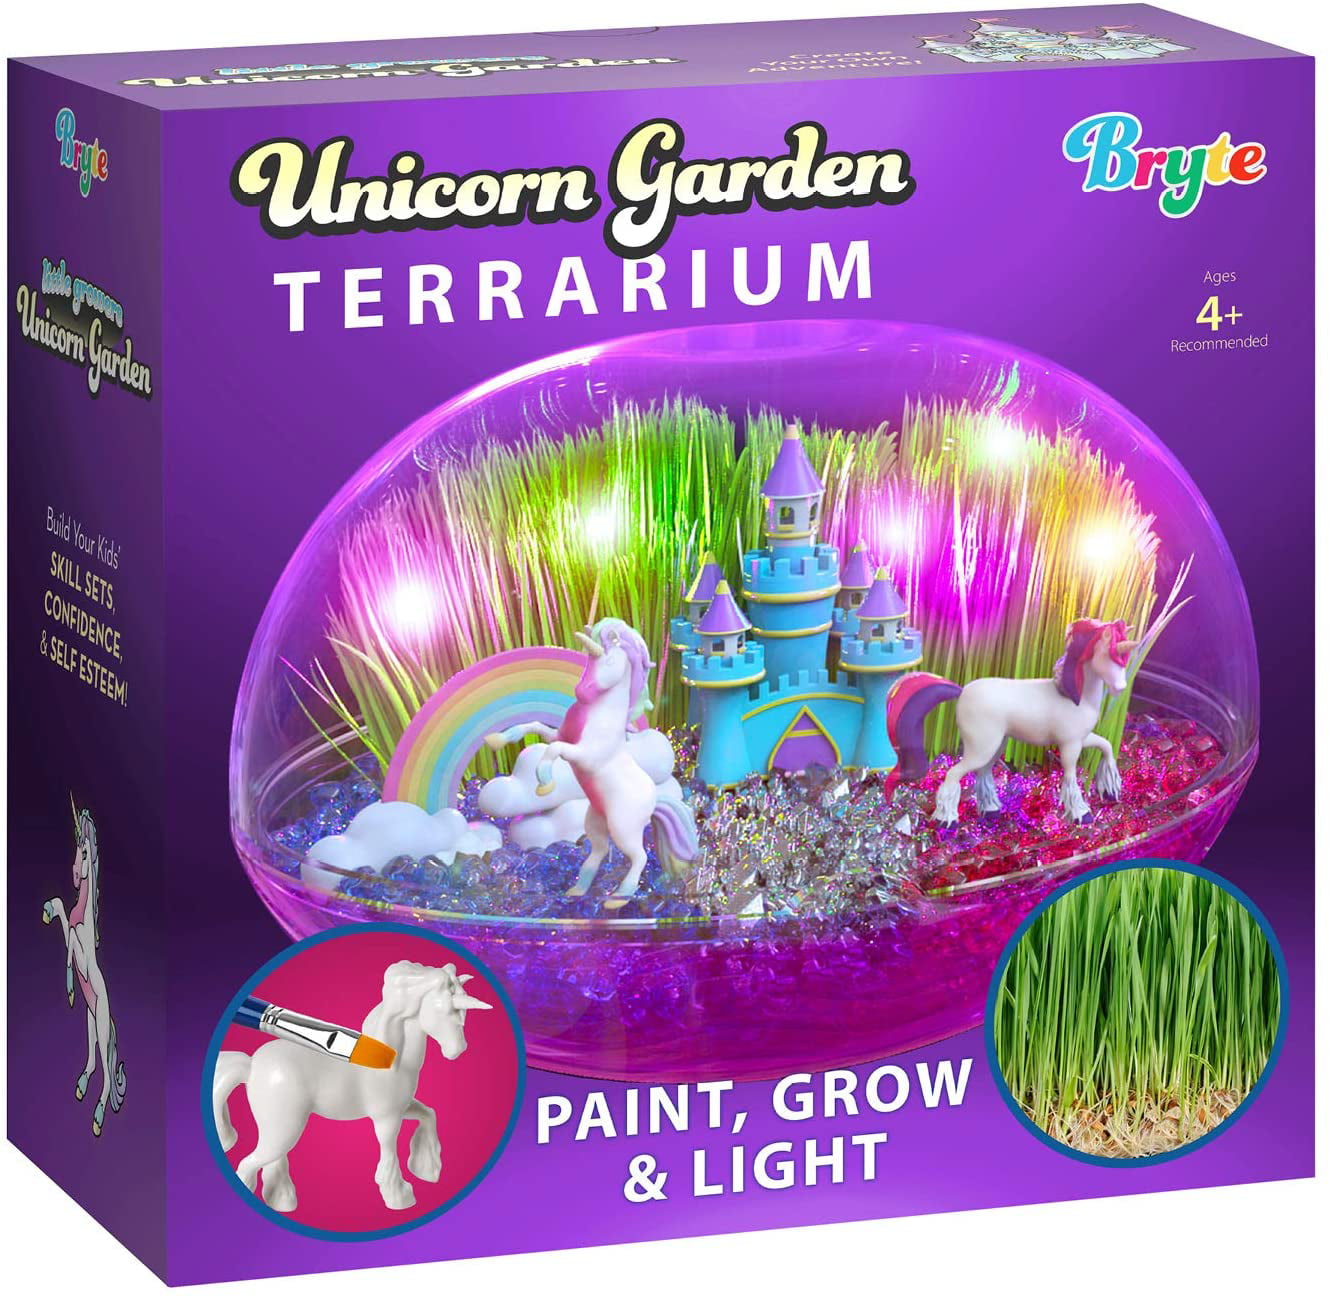 Catcrafter Fairy Garden Craft Kit for Kids Unicorn Grow Light Terrarium Kit Plant Accessories Gardening Craft Set Arts and Crafts STEM Project Unicorns Gifts for Girls Toddlers Kids Ages 5 6 7 8 9+ 